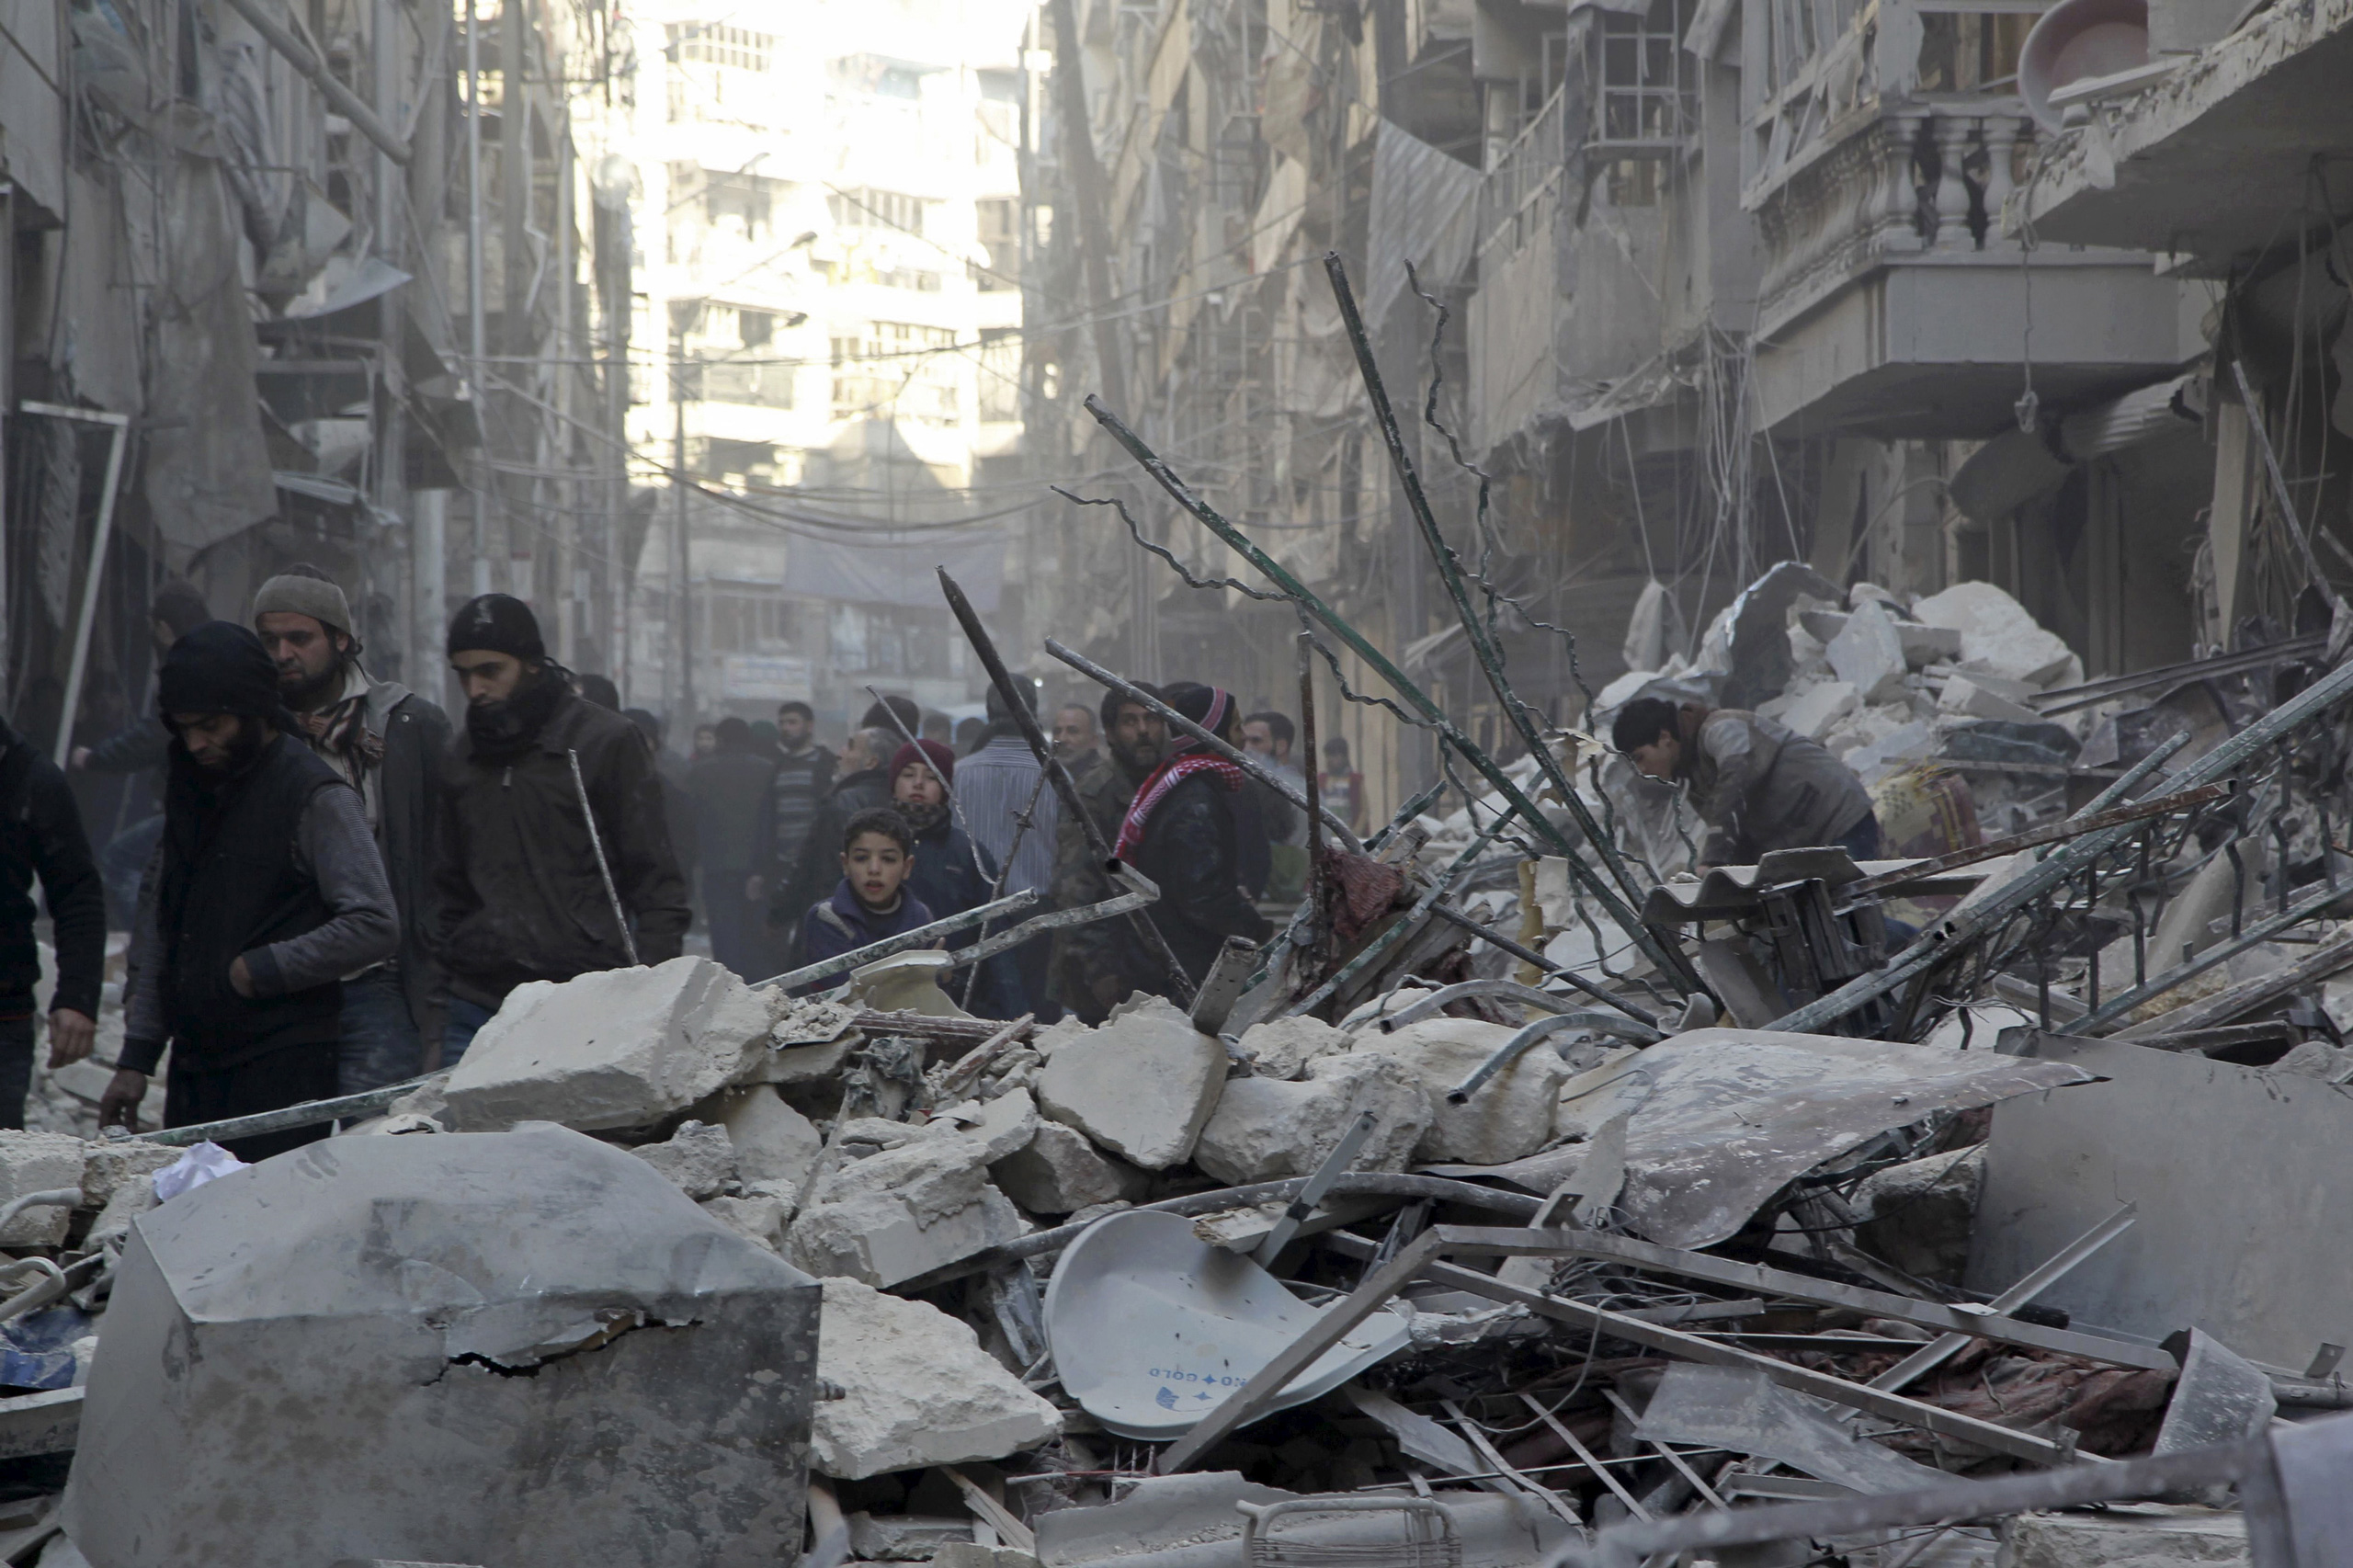 Residents inspect damage after airstrikes by pro-Syrian government forces in the rebel held Al-Shaar neighborhood of Aleppo, Syria, on Feb. 4, 2016. (Abdalrhman Ismail—Reuters)